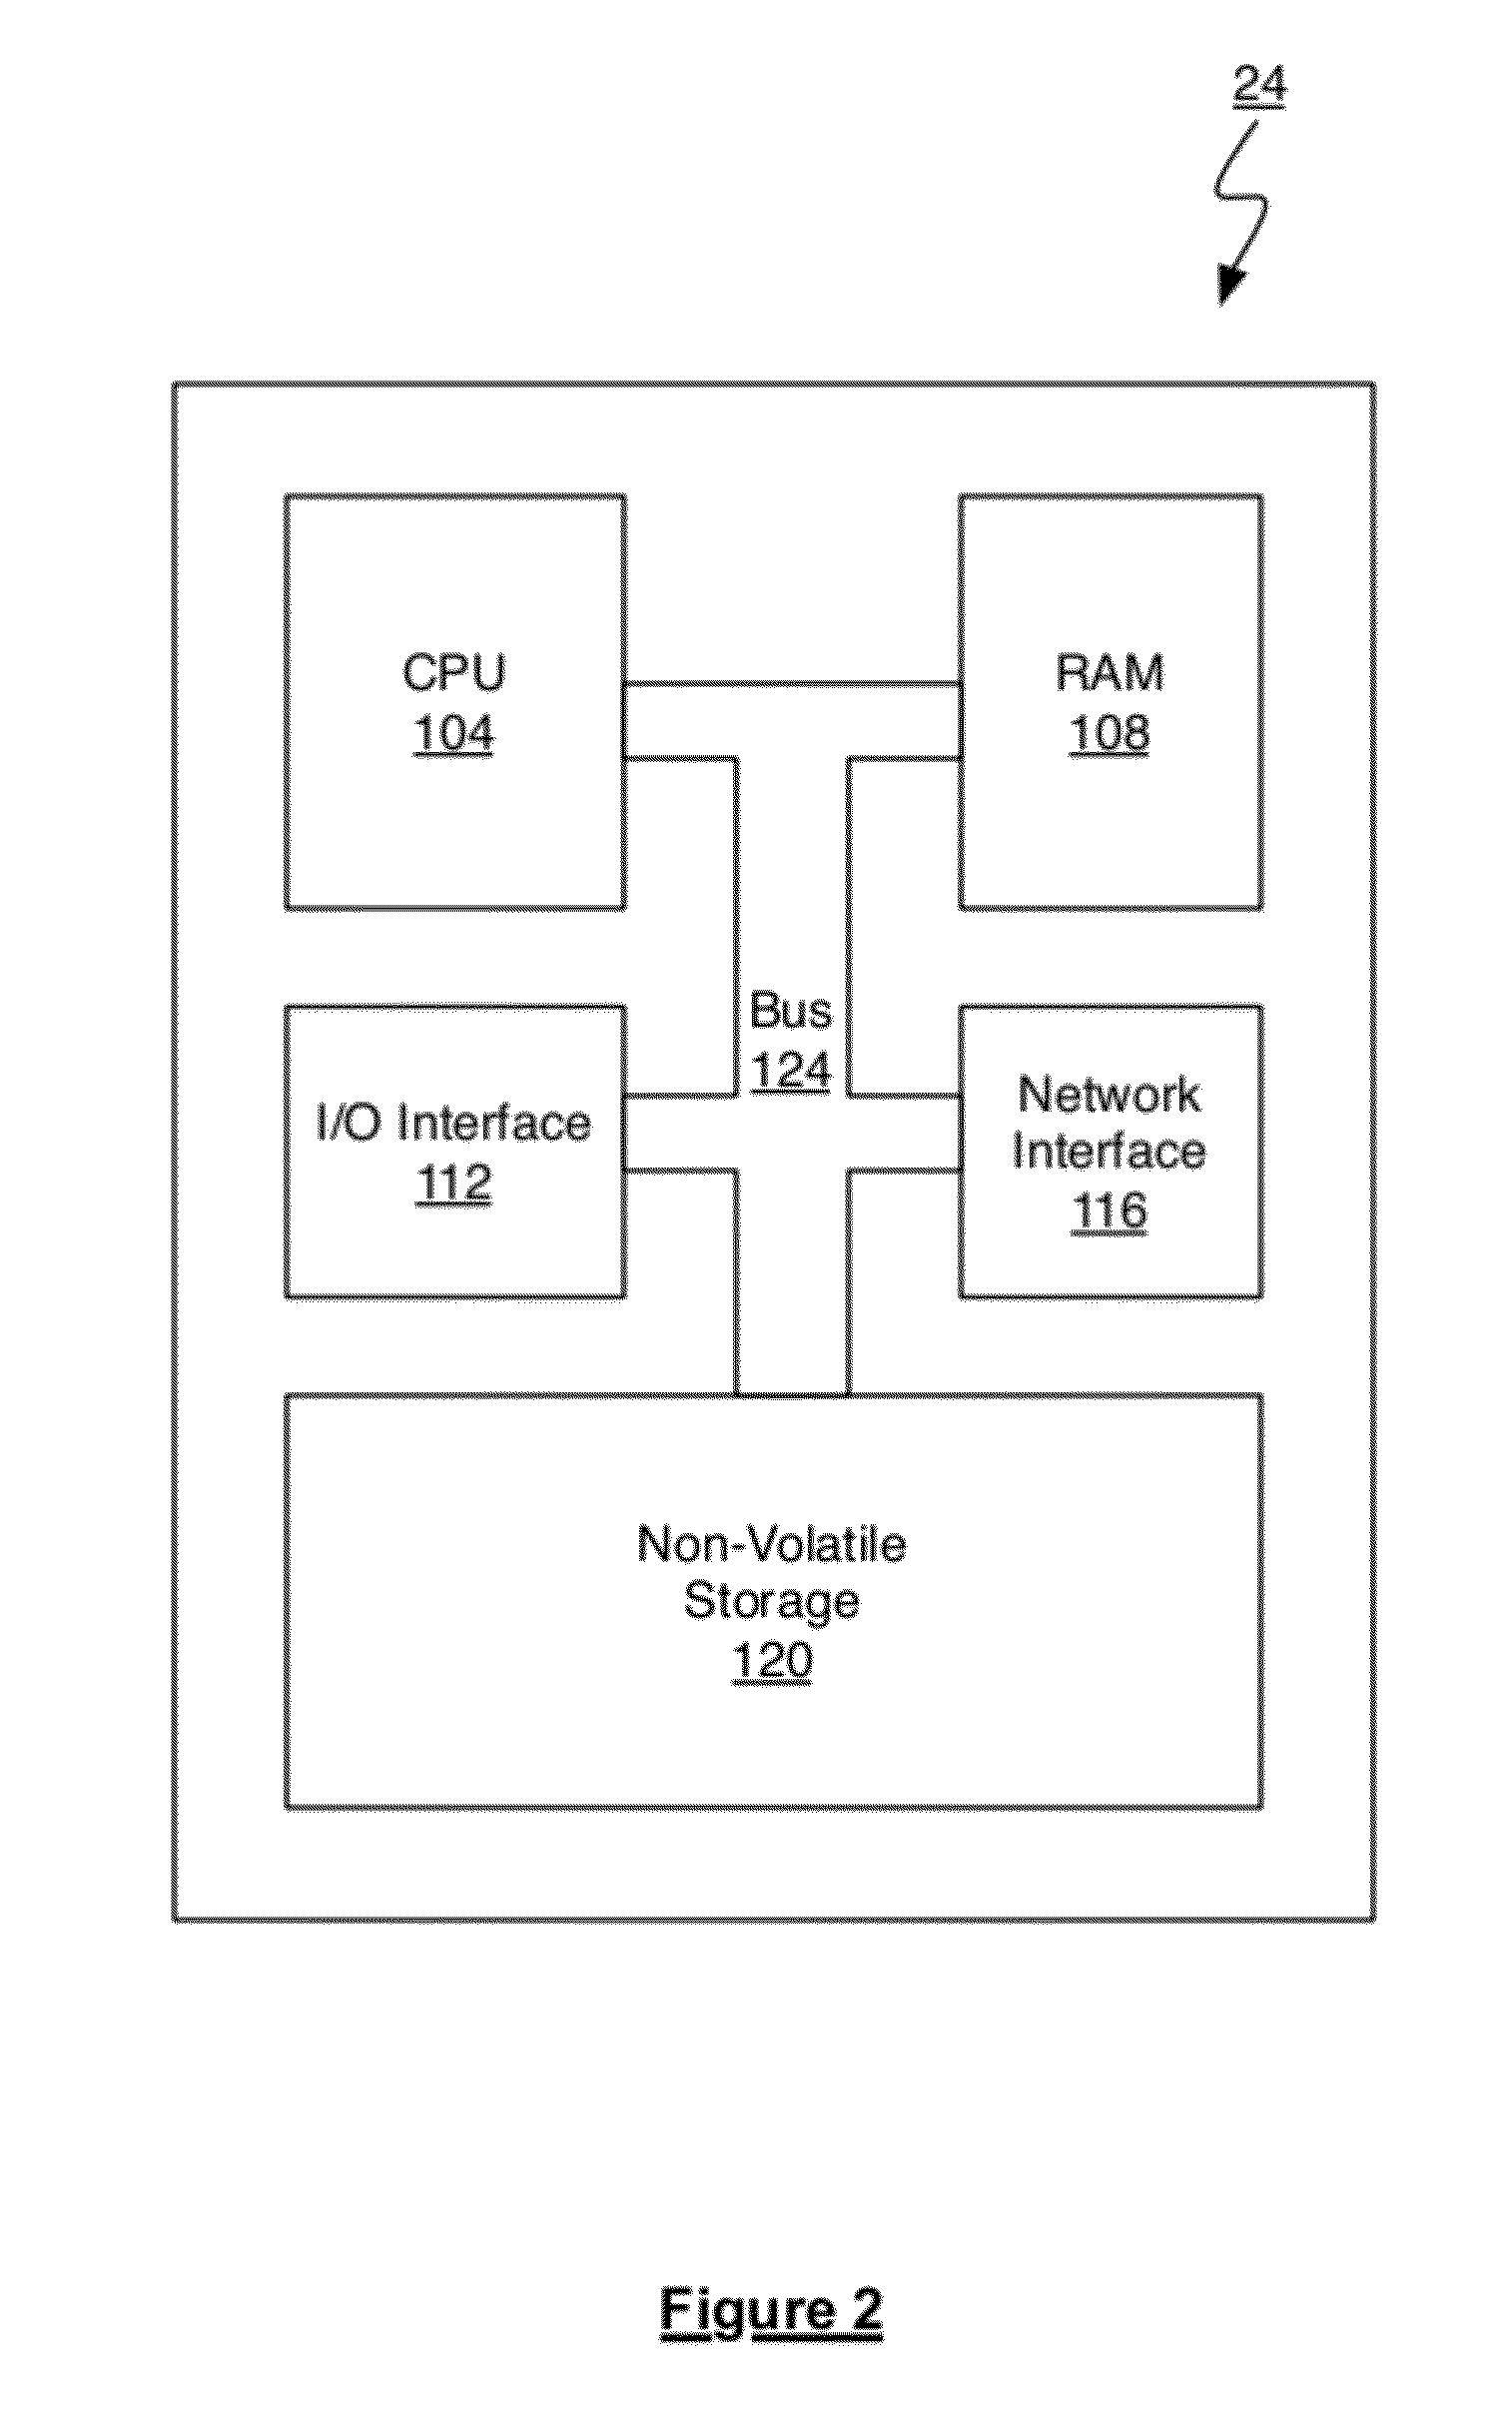 Method and System for Coordinating Transportation Service